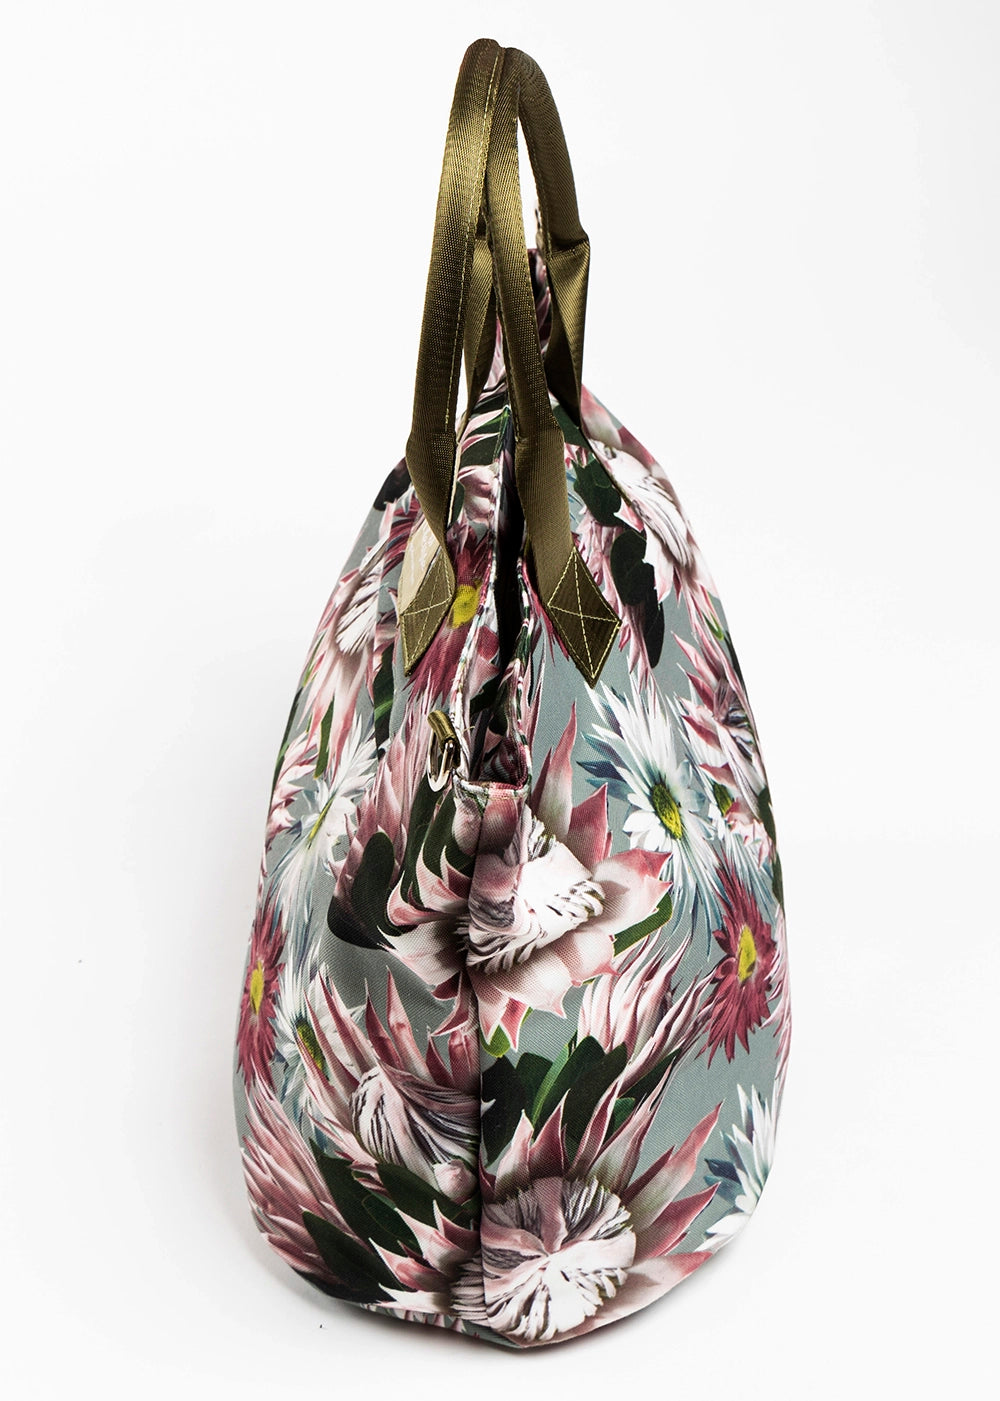 The Protea canvas tote bag which has pink wildflowers on a soft green background with green handles.